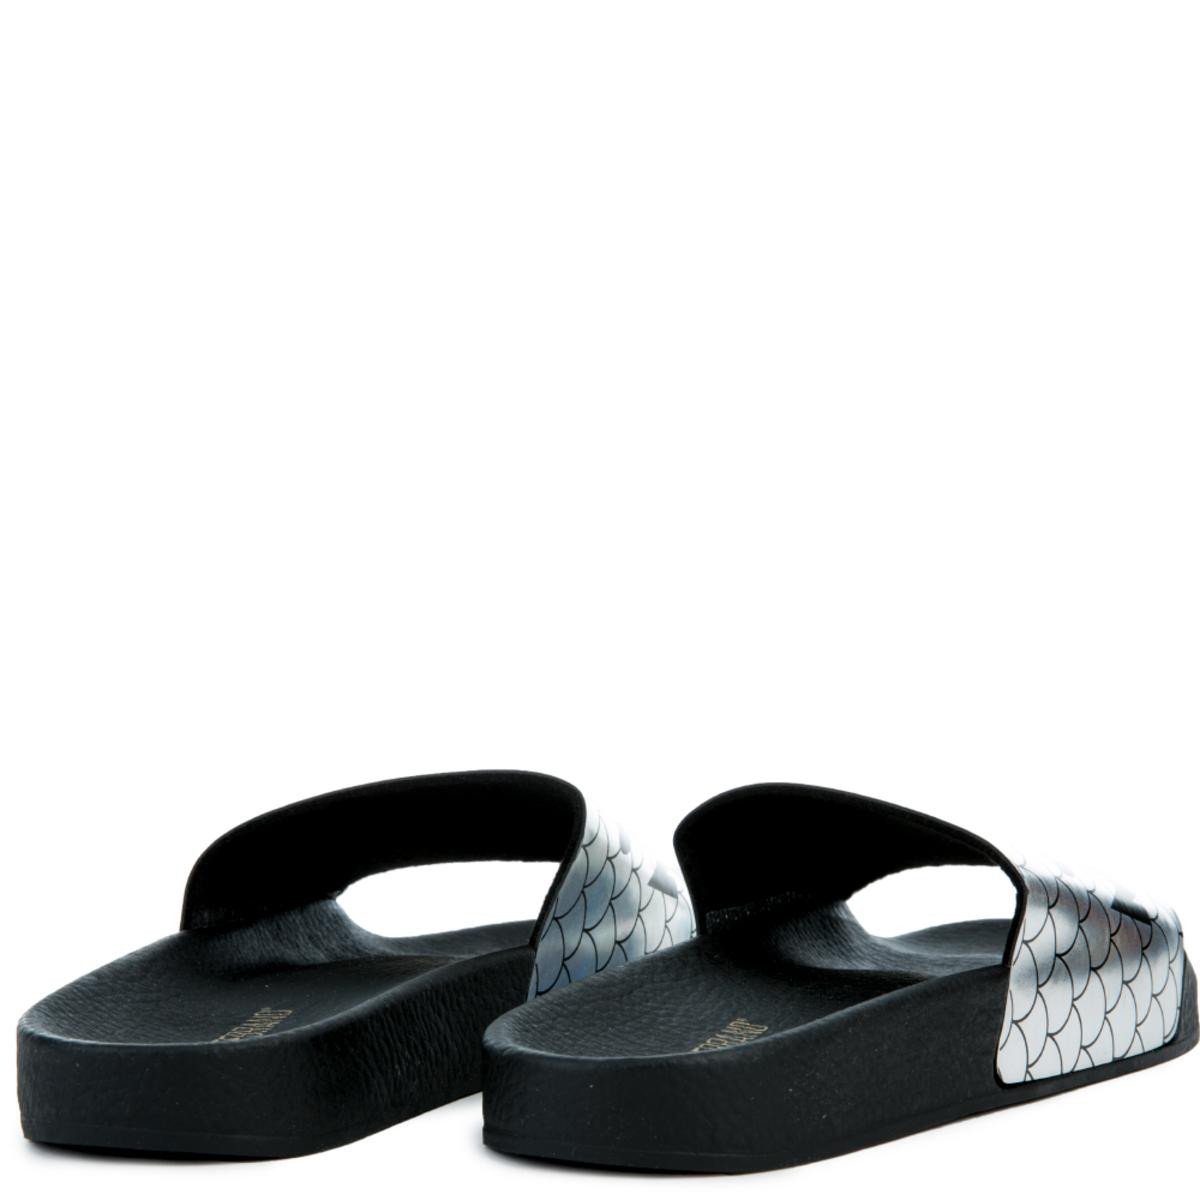 Mermaid Slides in Black and Silver BLACK/WHITE/Silver